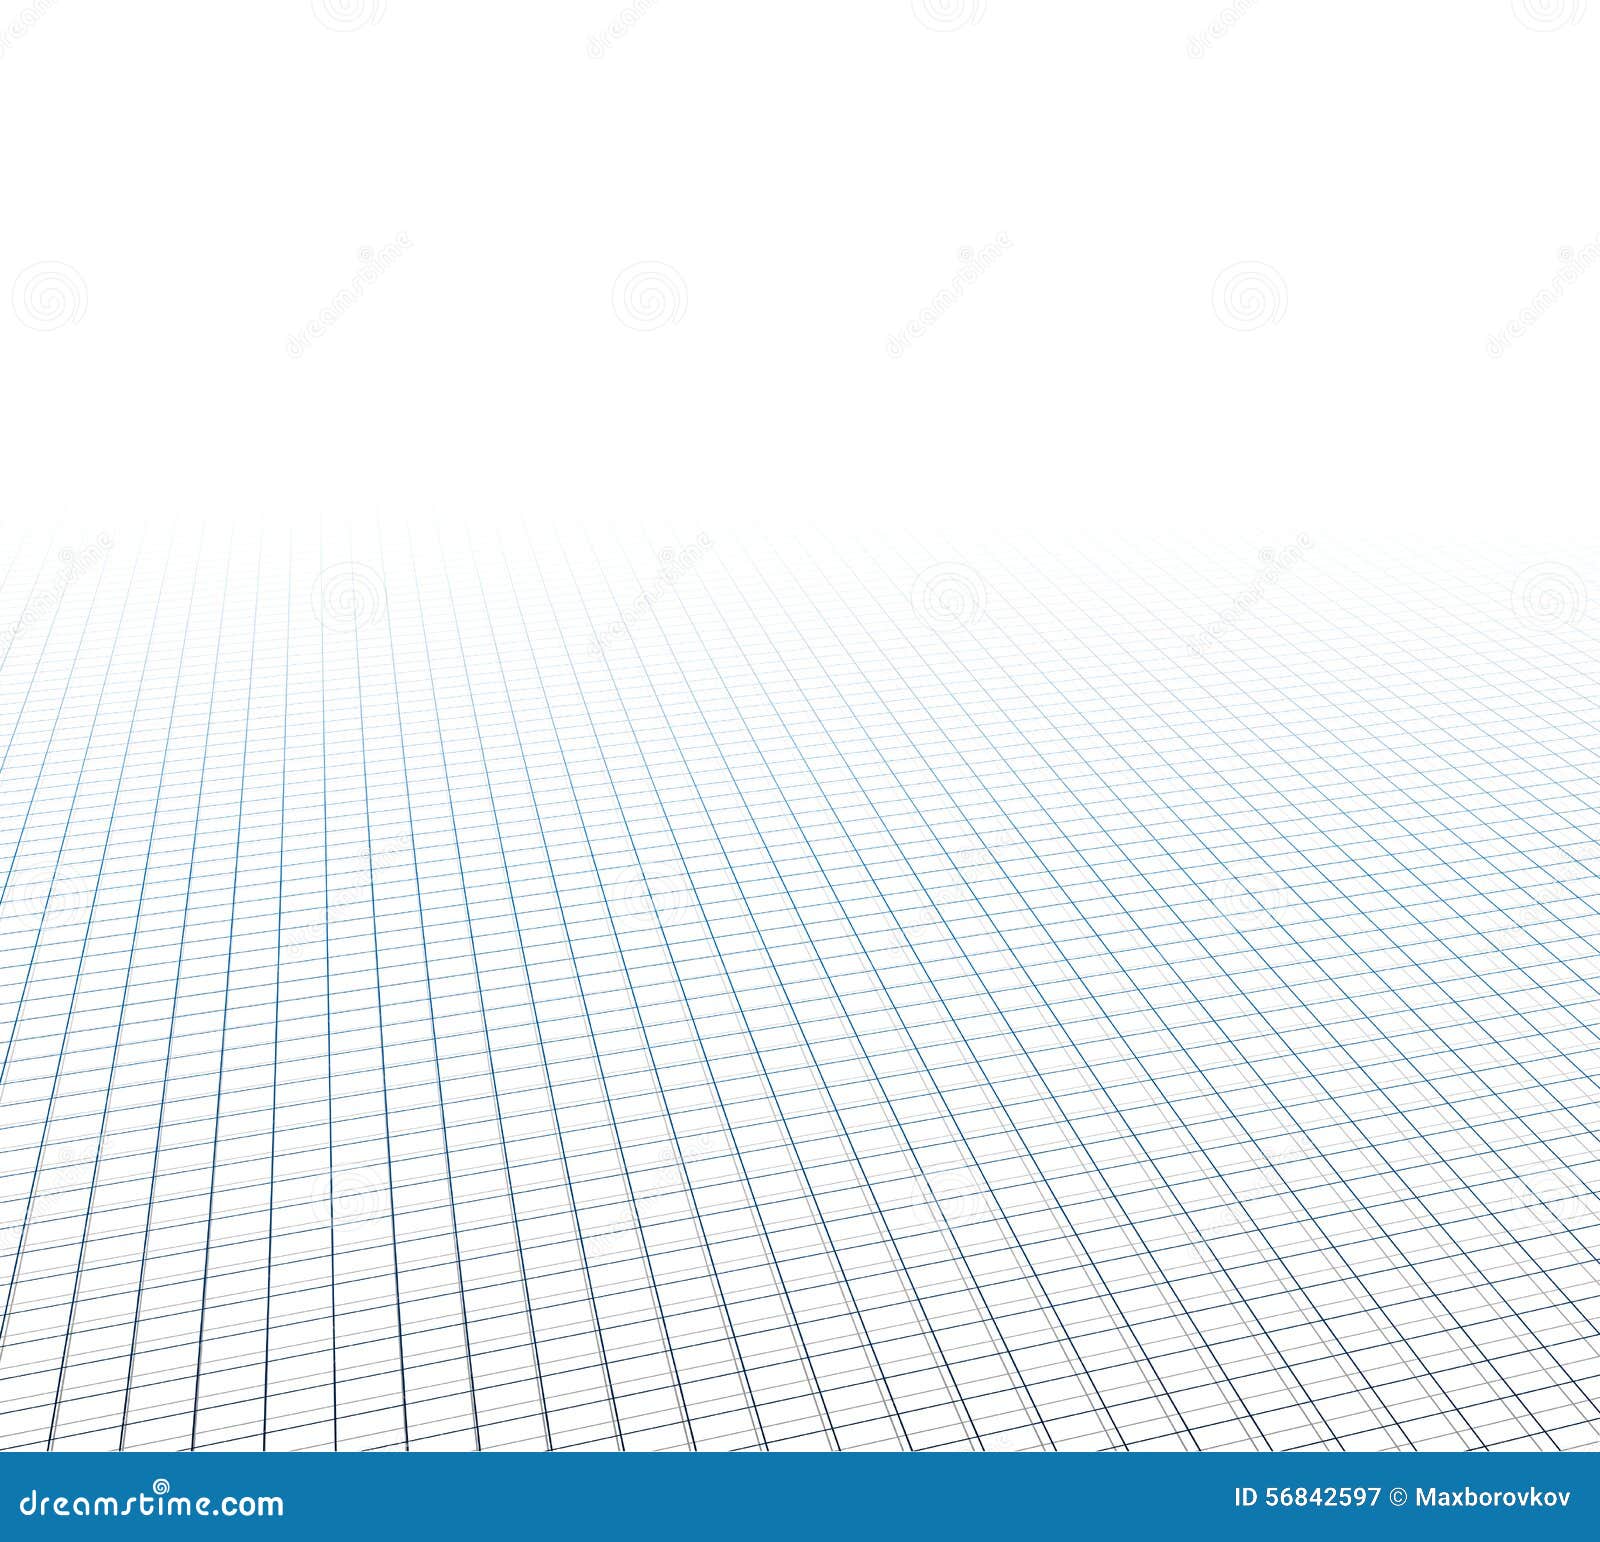 Perspective Grid Surface Stock Vector - Image: 56842597